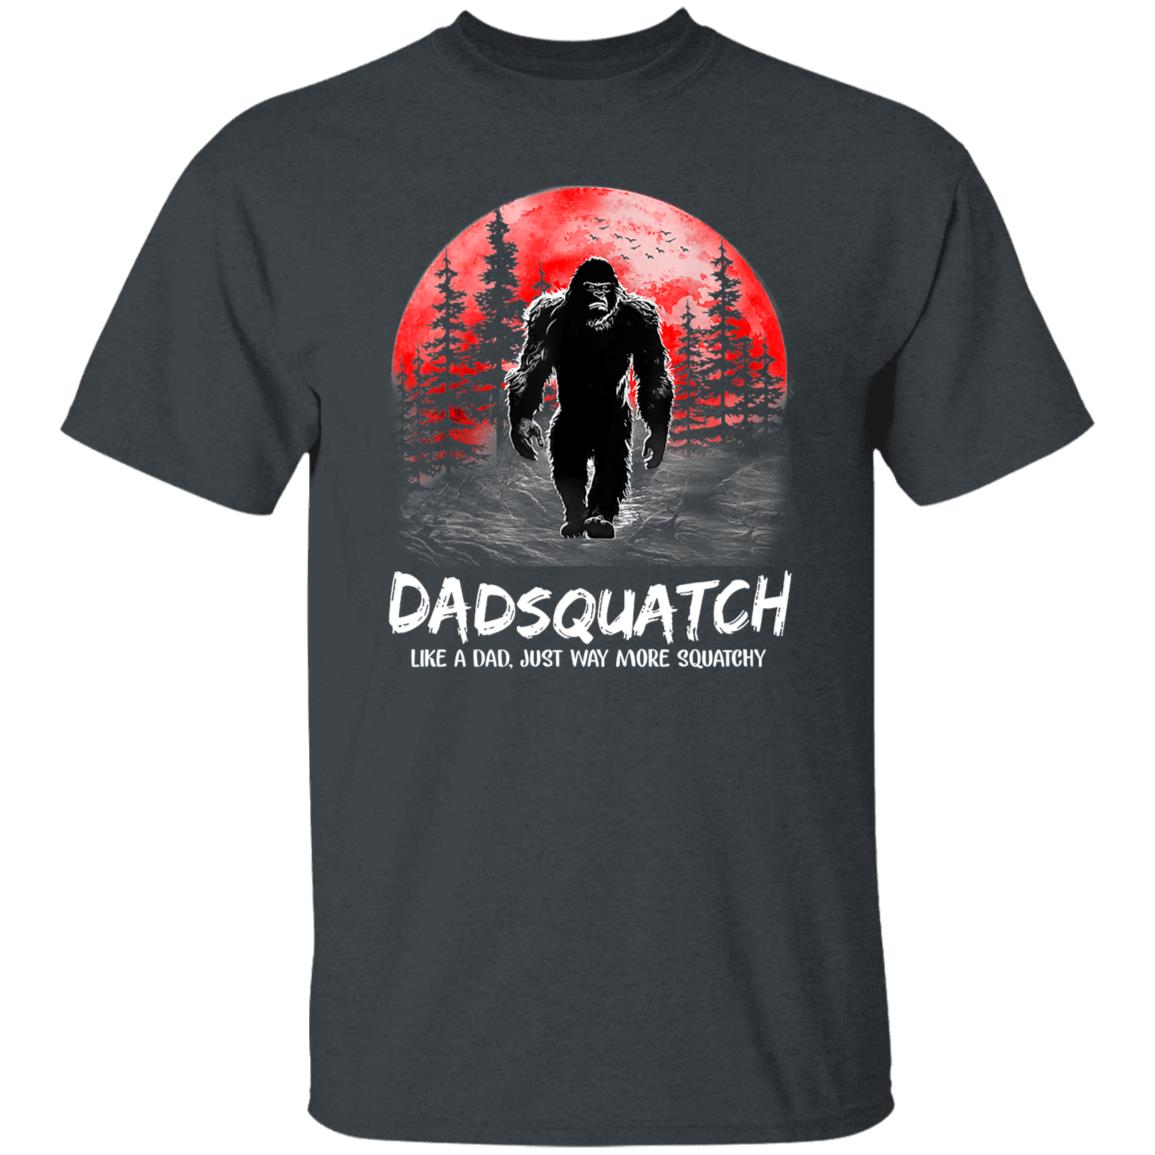 Dadsquatch Like A Dad Just Way More Squatchy Funny Shirt